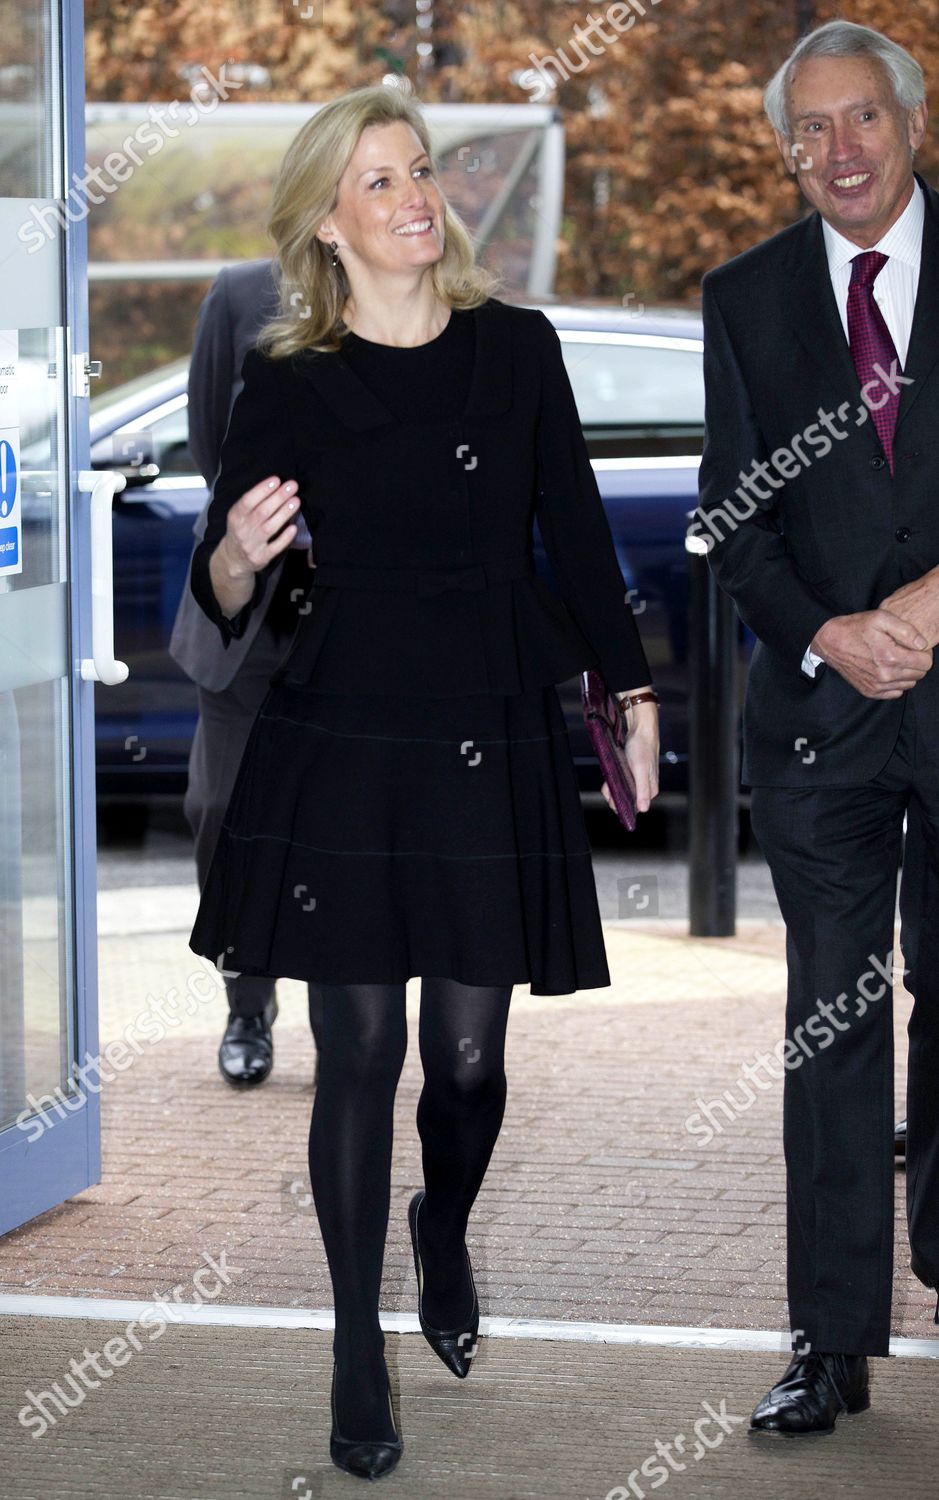 sophie-countess-of-wessex-visits-the-urgent-care-centre-bracknell-berkshire-britain-shutterstock-editorial-4428098d.jpg